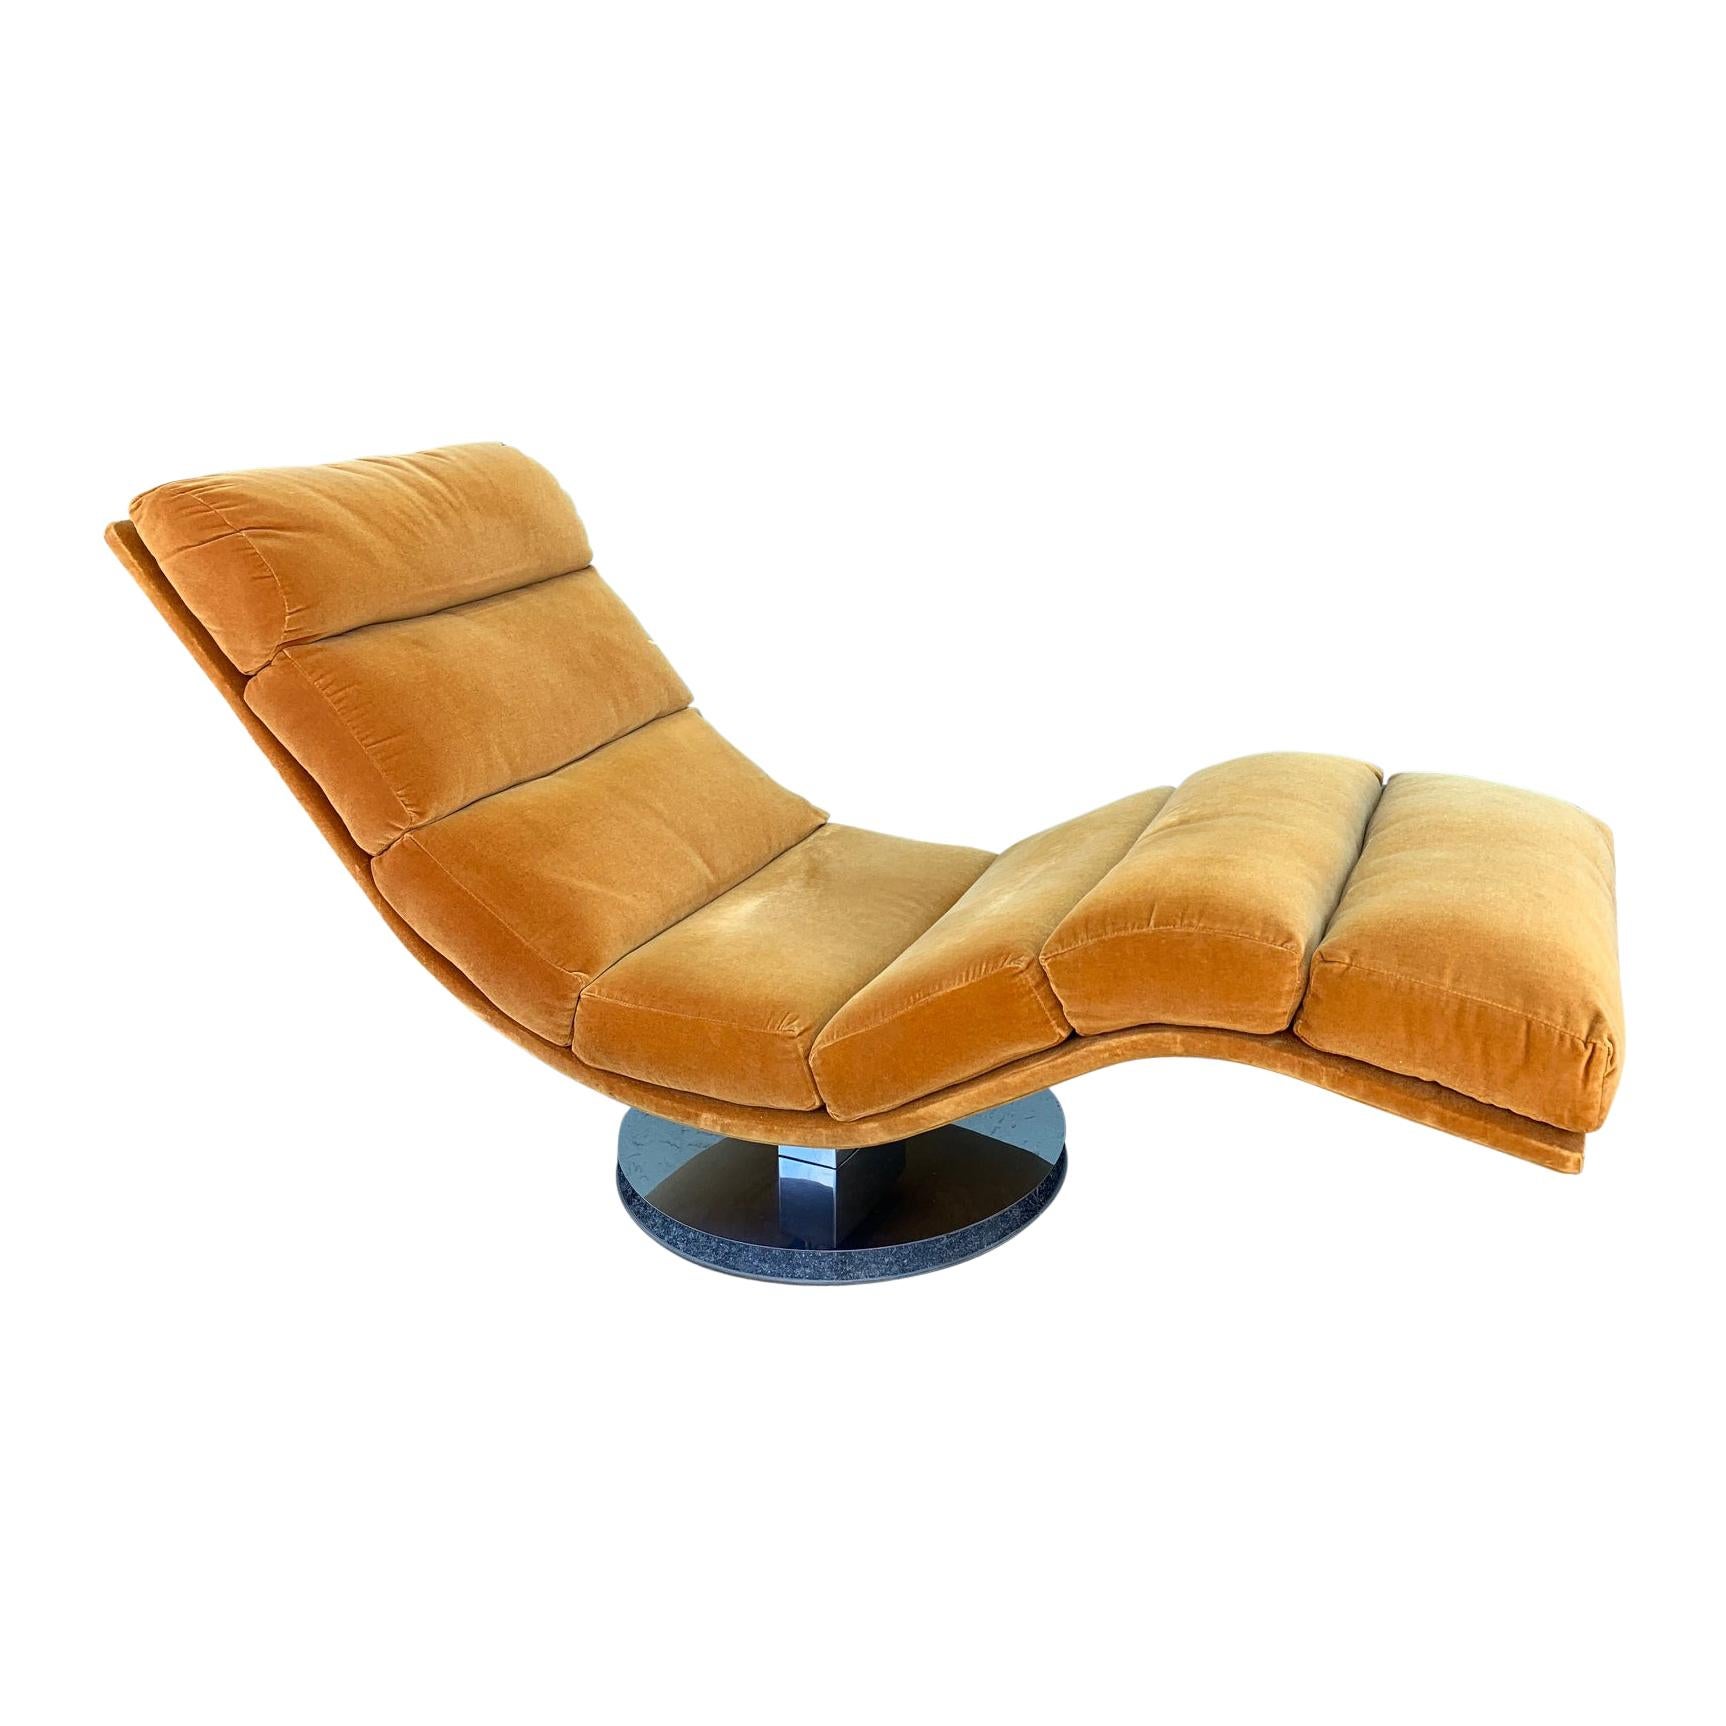 Swivel Rocking Wave Chaise Lounge Chair by Milo Baughman for Thayer Coggin